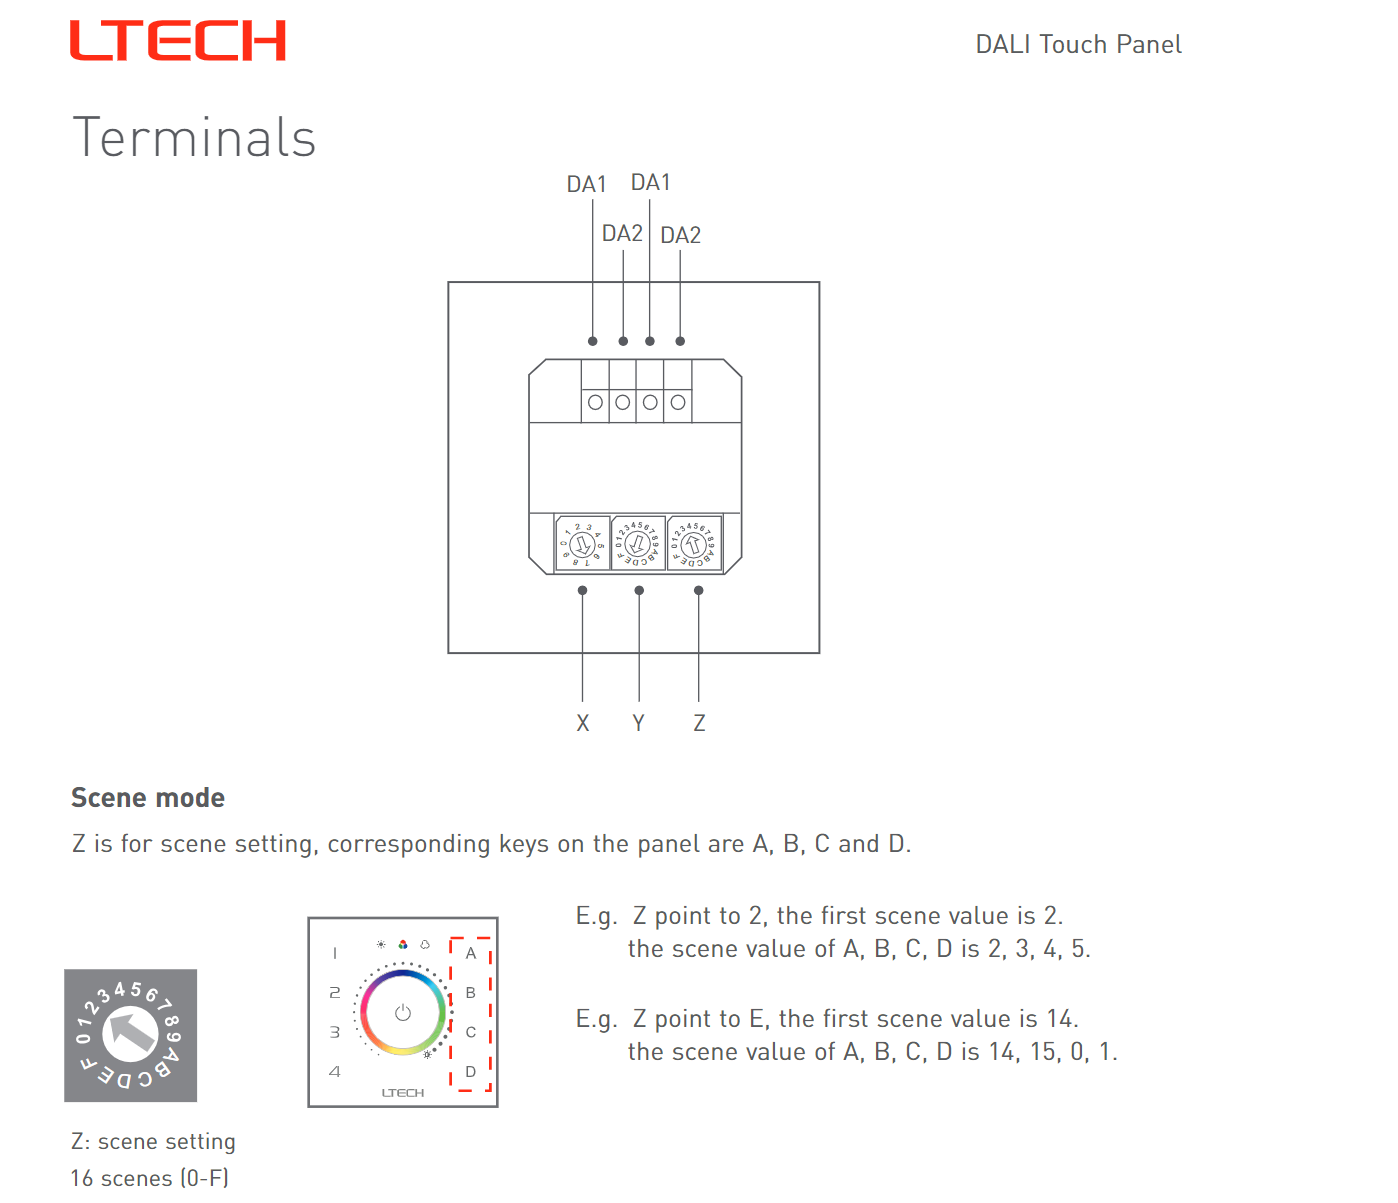 Ltech_EDT2_DALI_CT_Touch_Panel_Master_Led_Controller_9